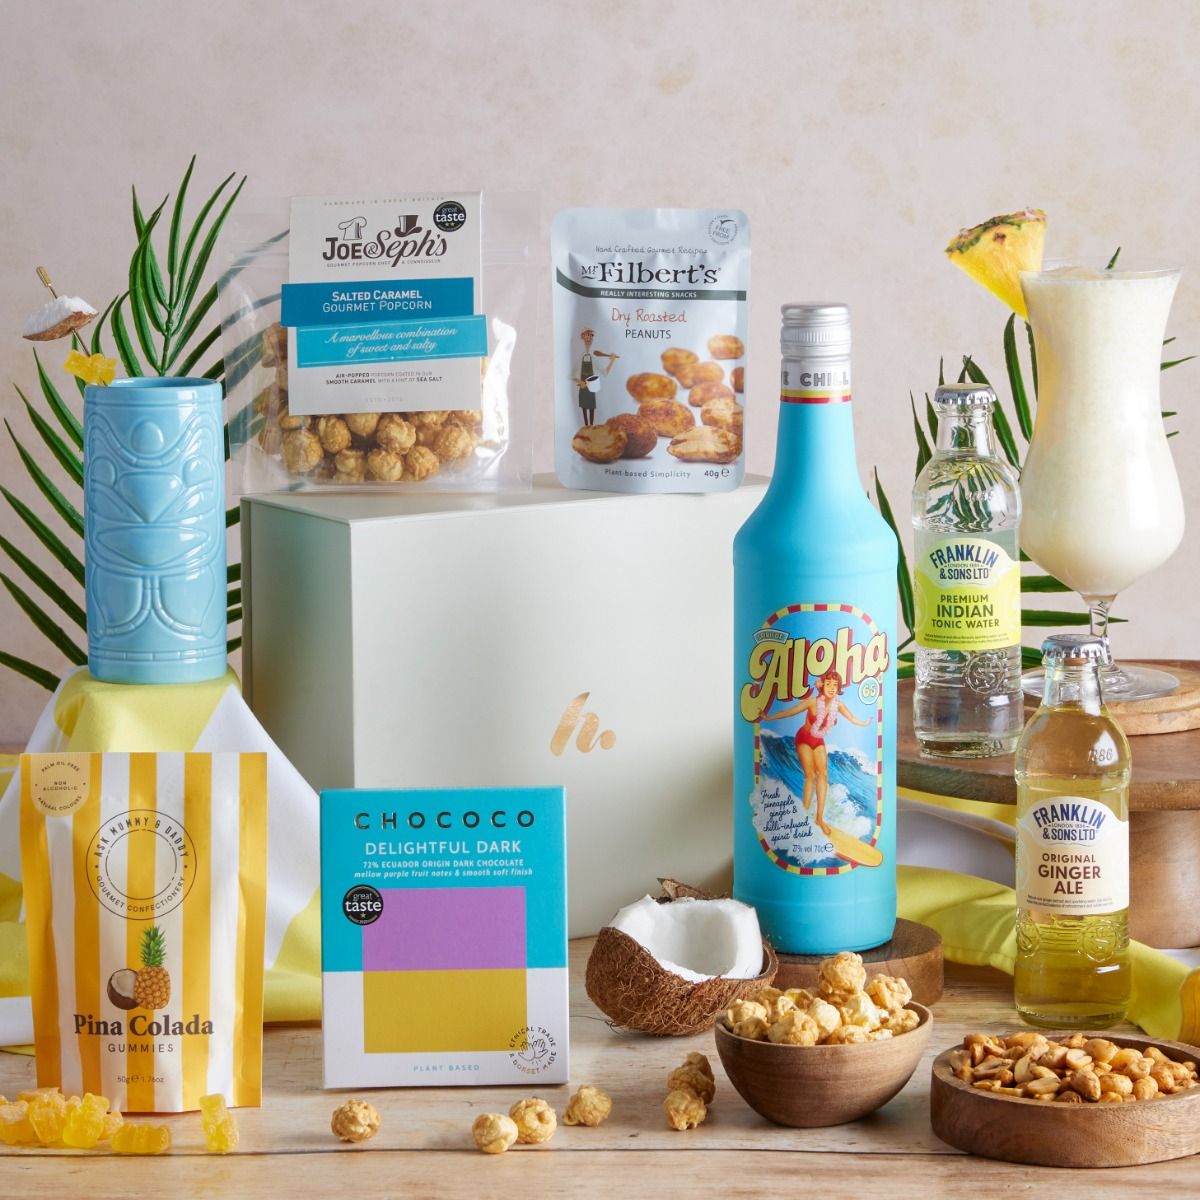 The Aloha Summer Cocktail Hamper with contents on display